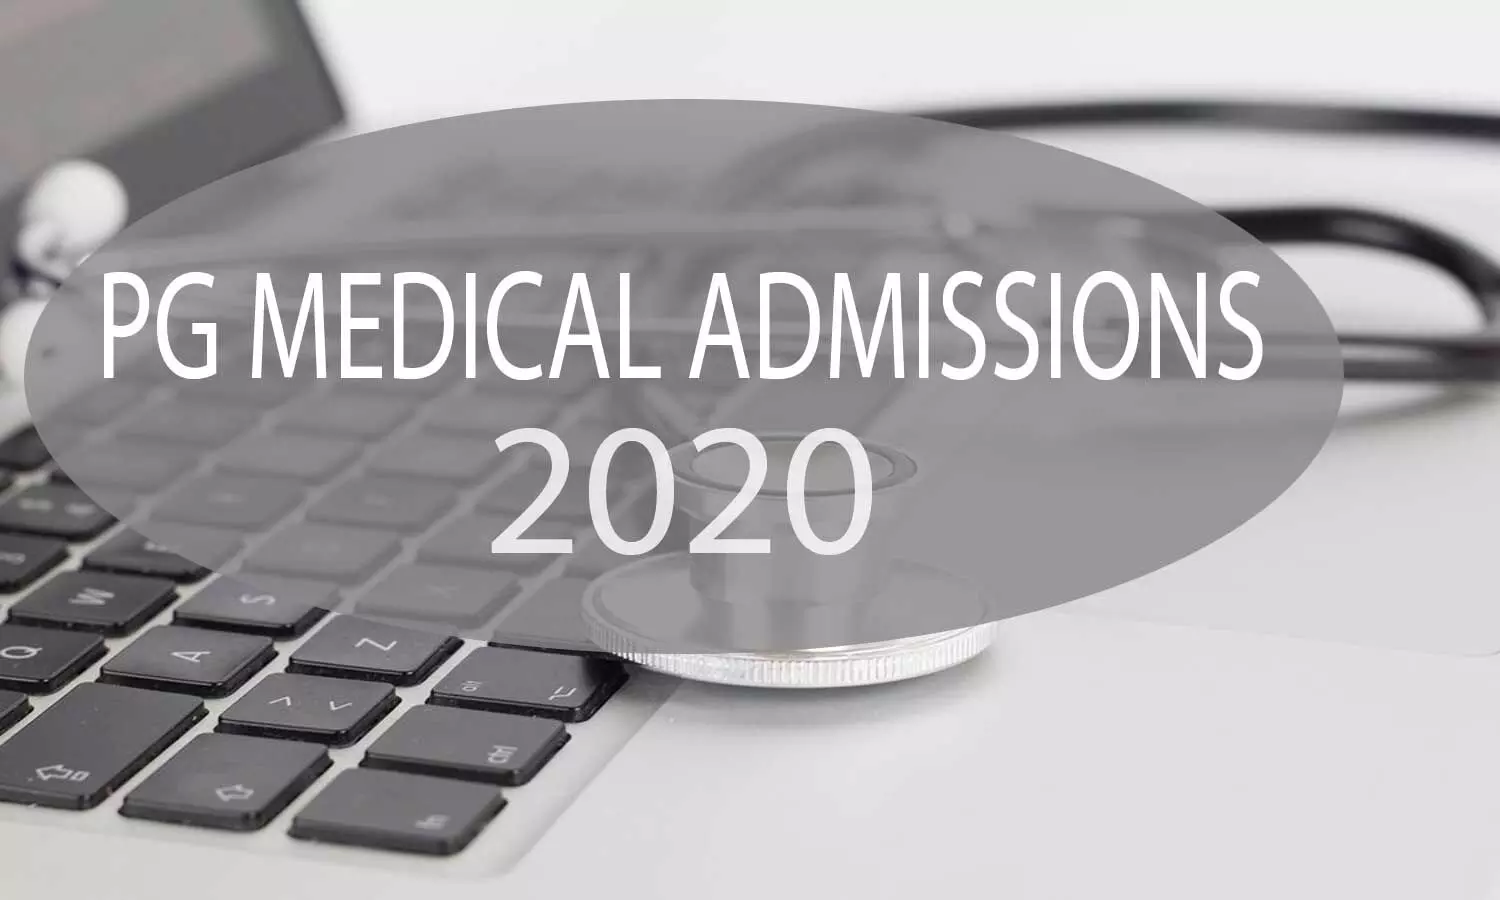 Online Registration extended for PG Medical, Dental Admissions: TN Health issues notice